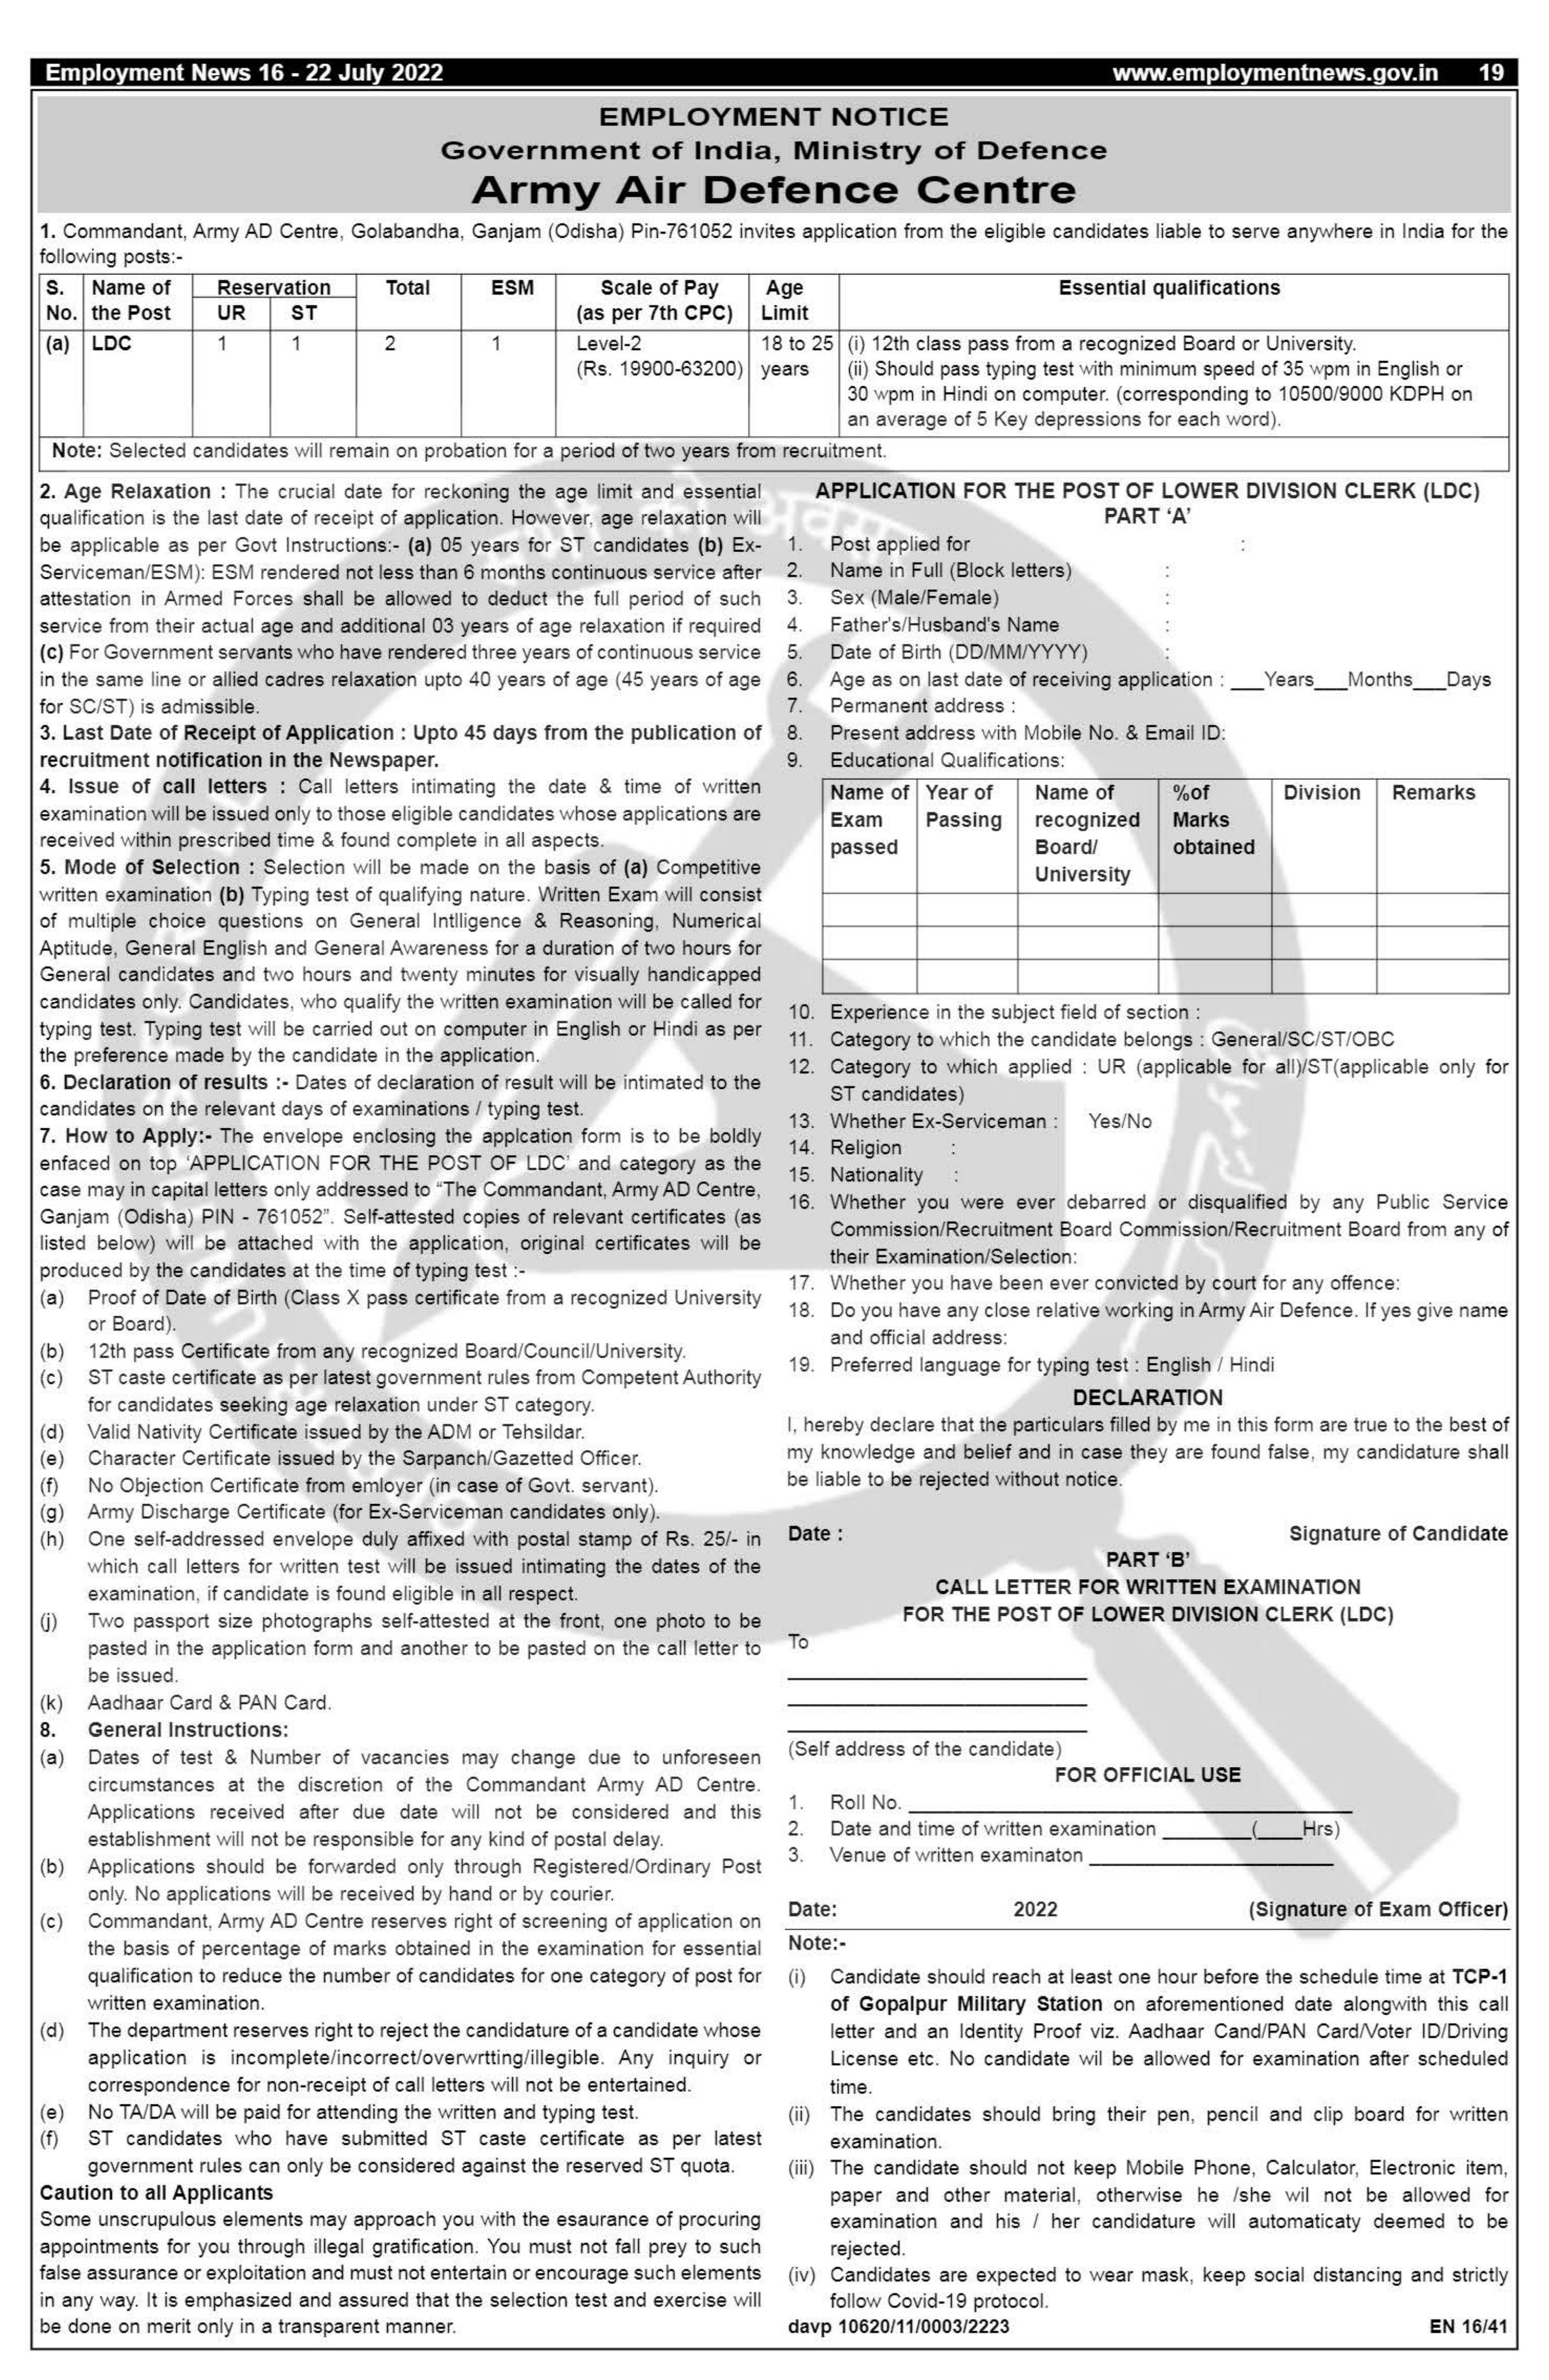 Ministry Of Defence Invites Application for Lower Division Clerk Recruitment 2022 - Page 1